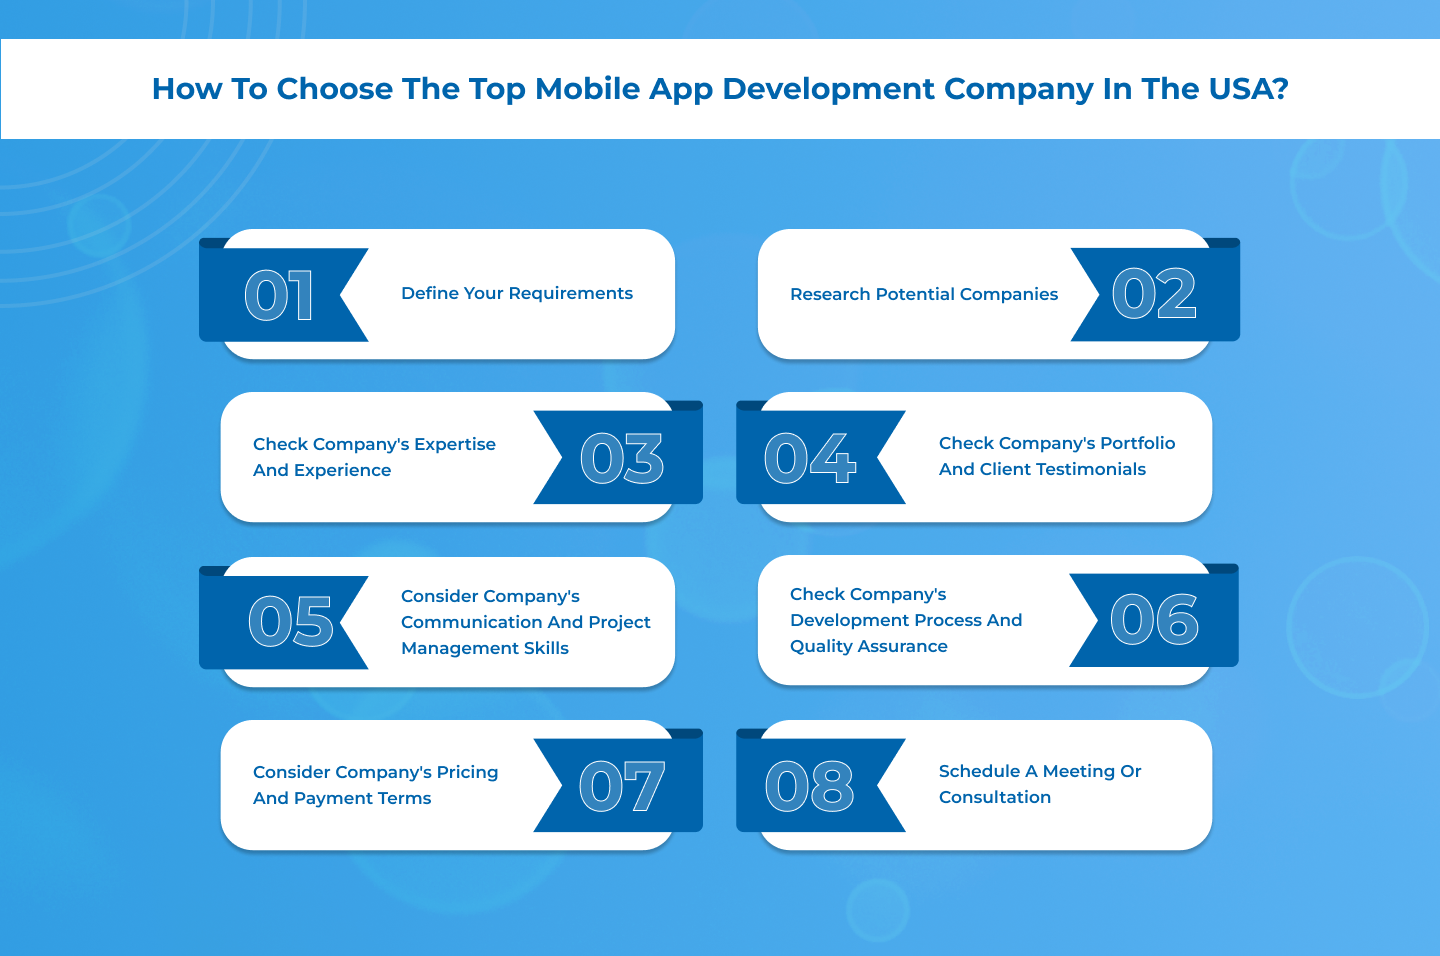 How To Choose The Top Mobile App Development Company In The USA